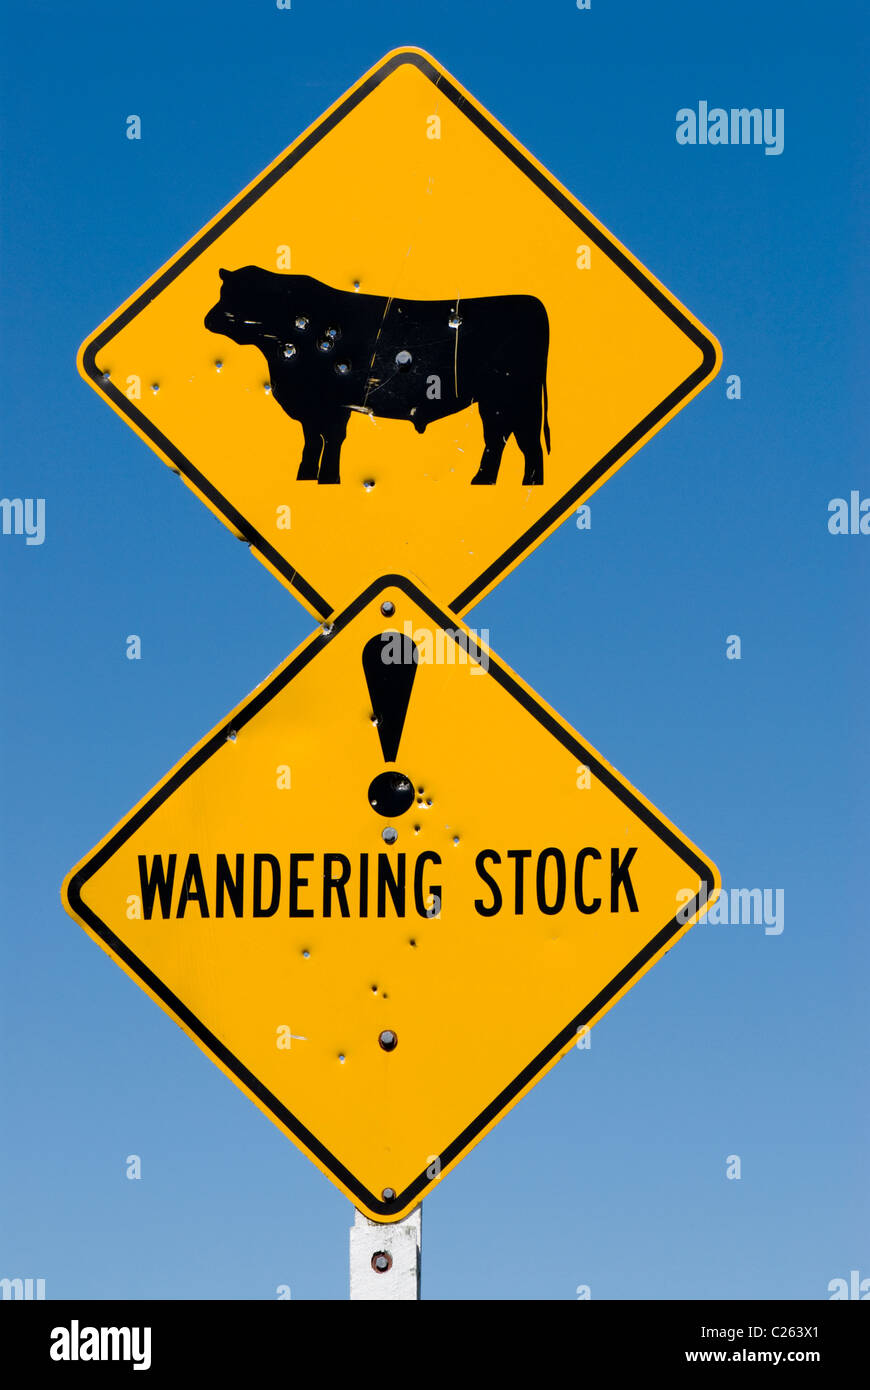 Wandering stock warning sign with bull and exclamation mark. Stock Photo